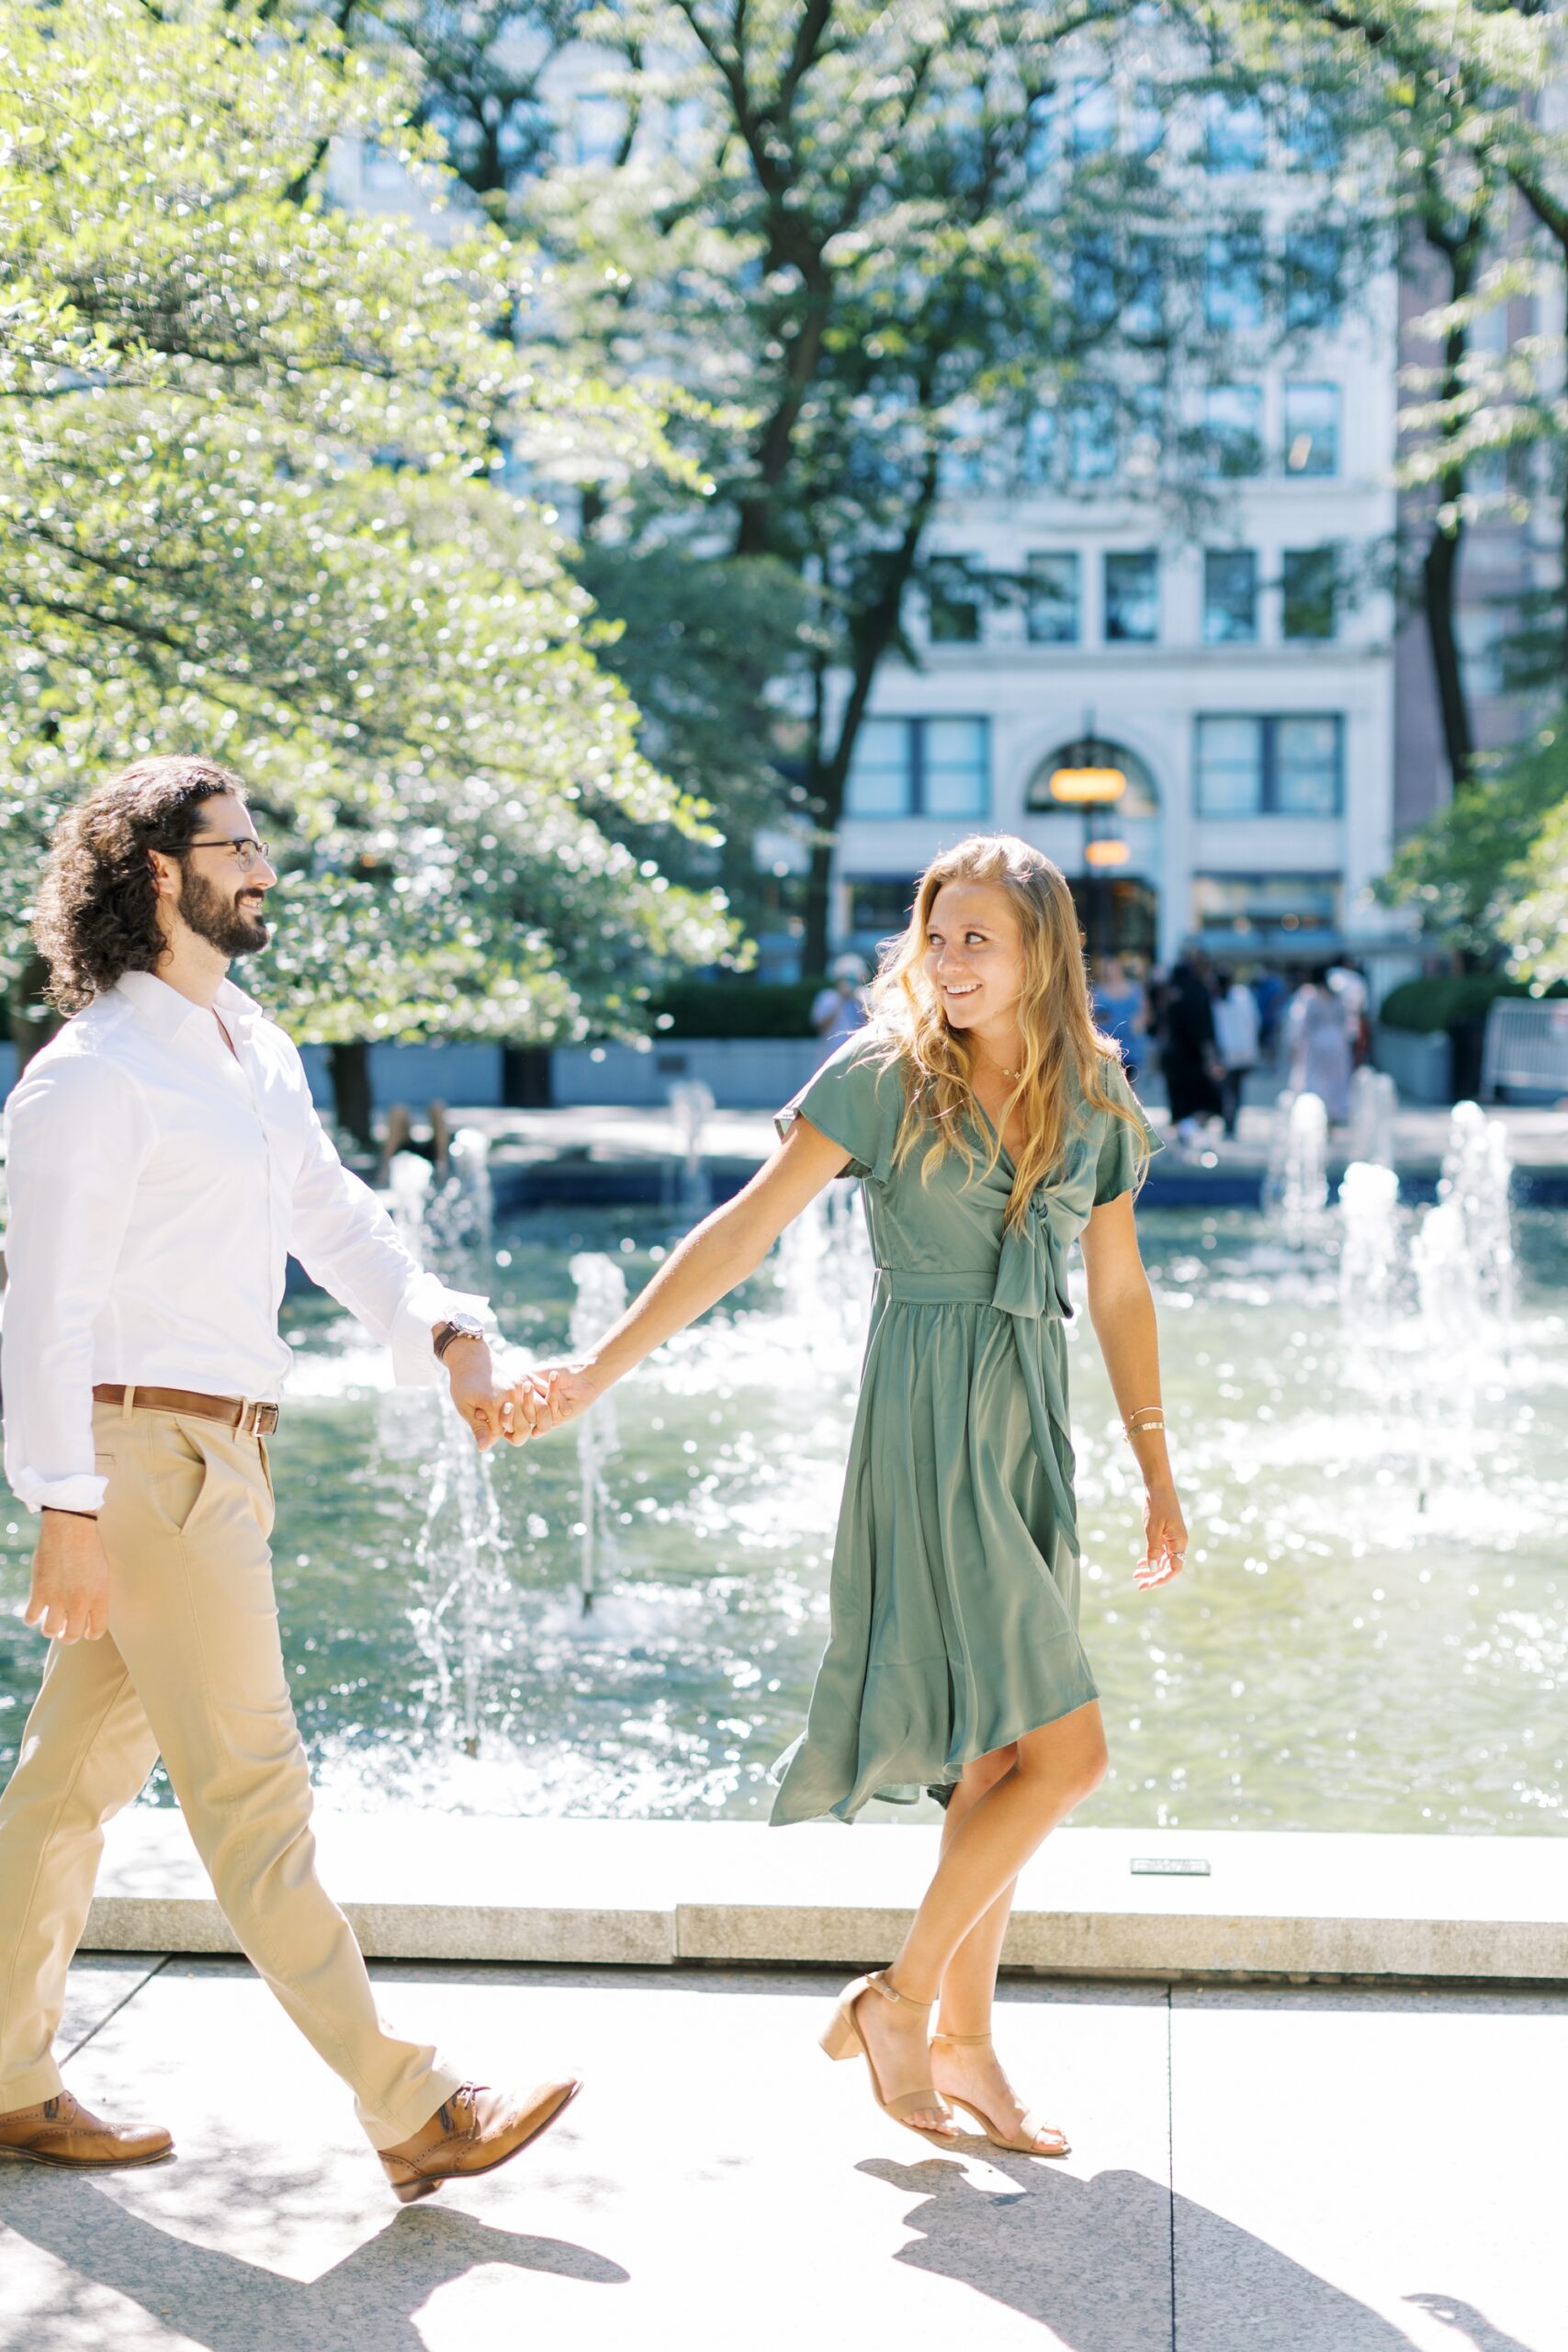 Man and woman hold hands during Downtown Chicago engagement photo session